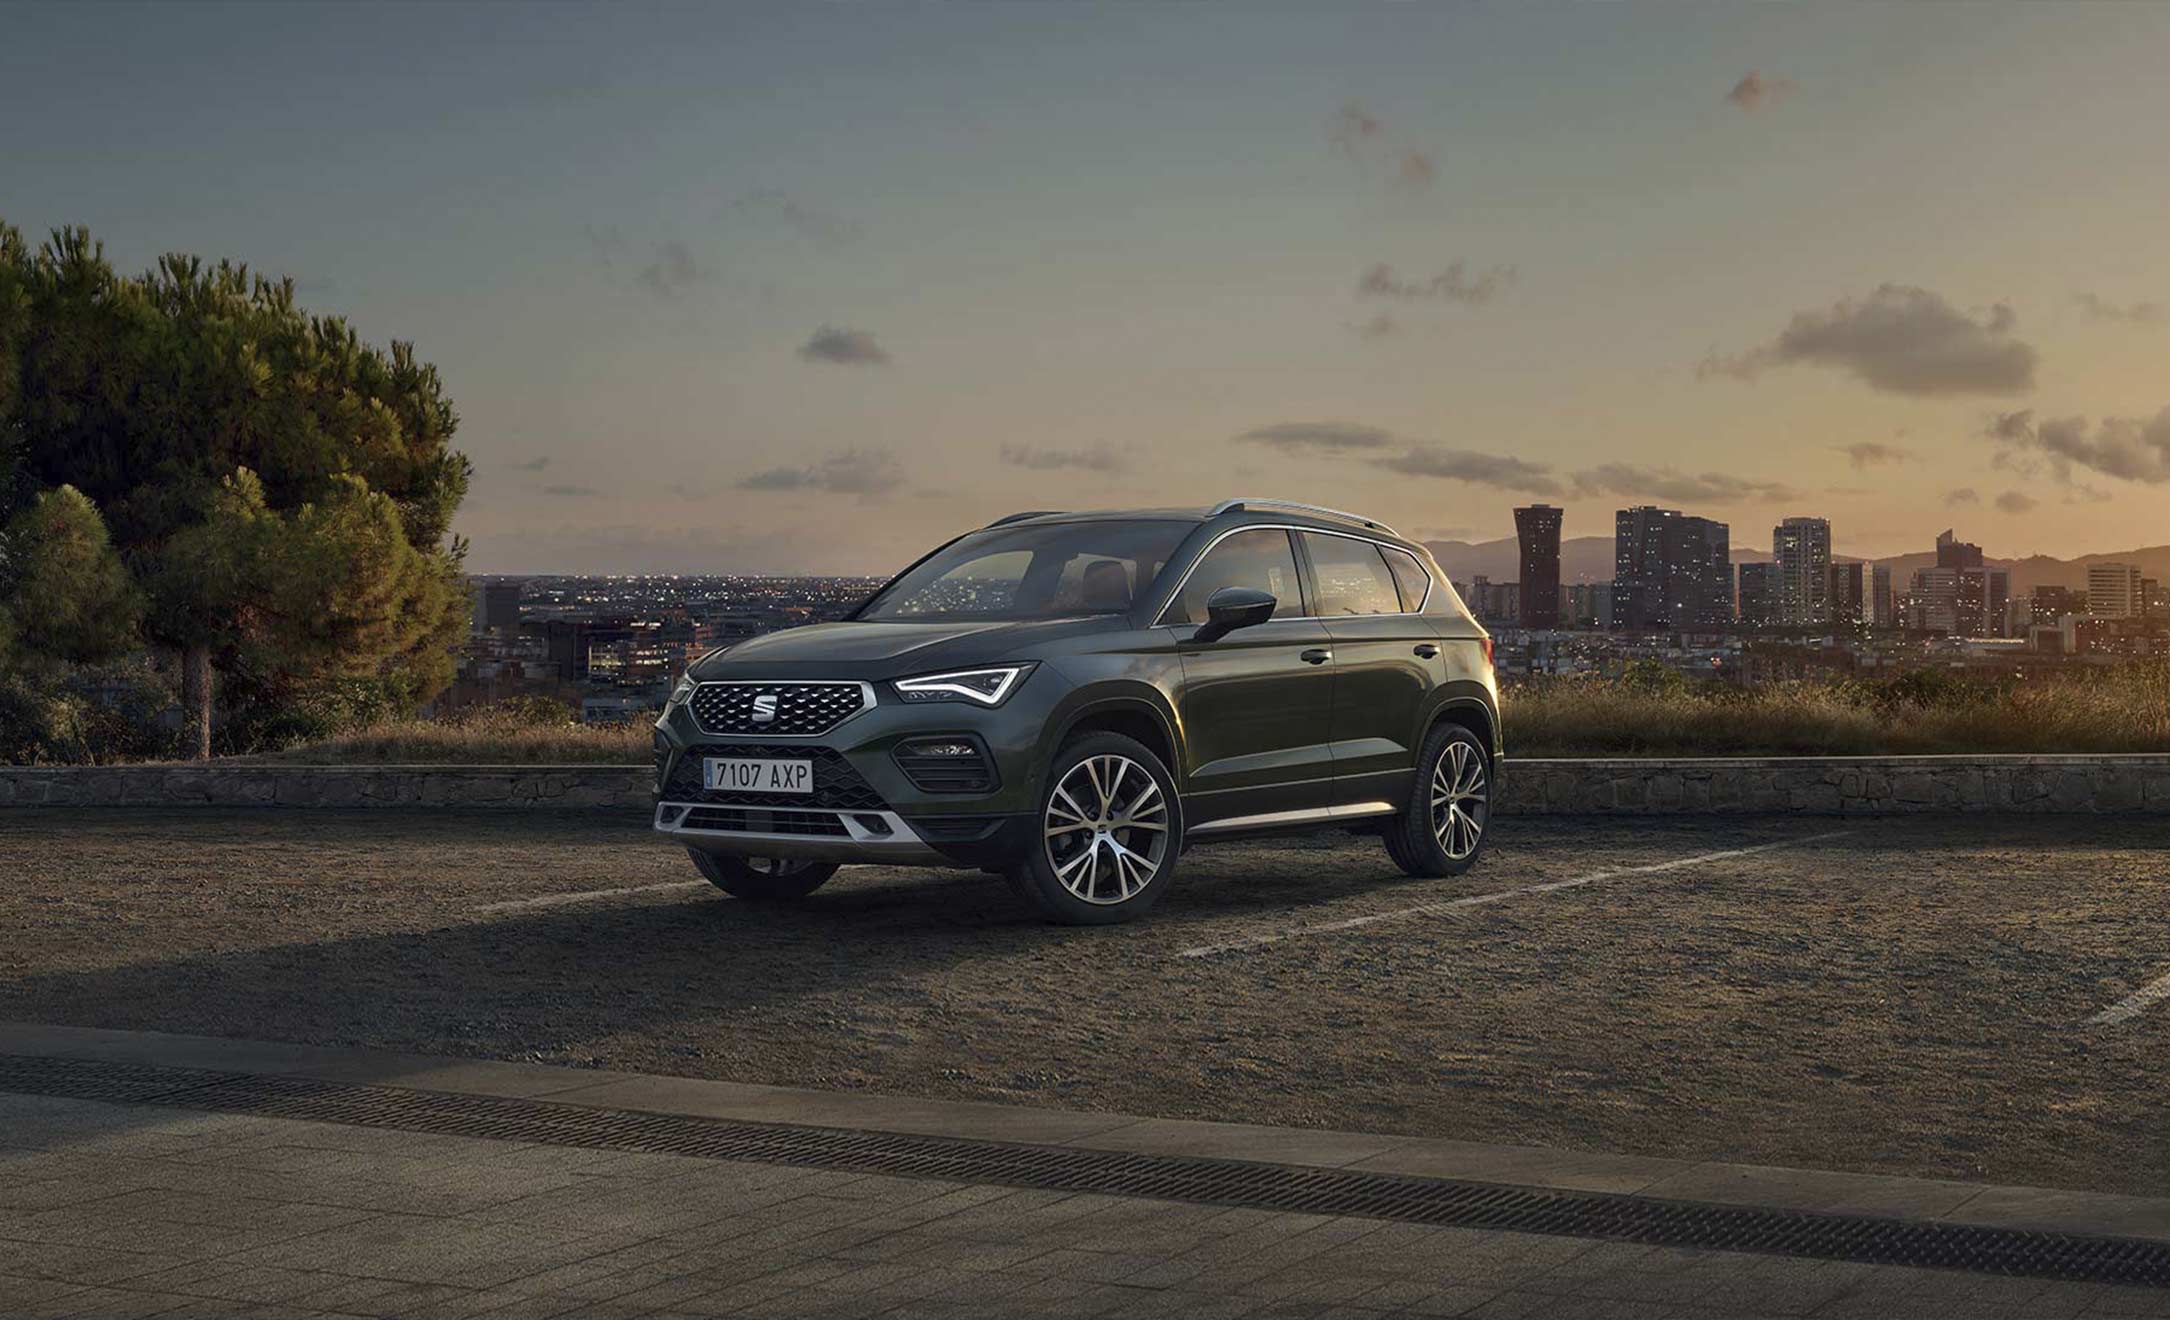 SEAT Ateca dark camouflage colour in a parking lot. 